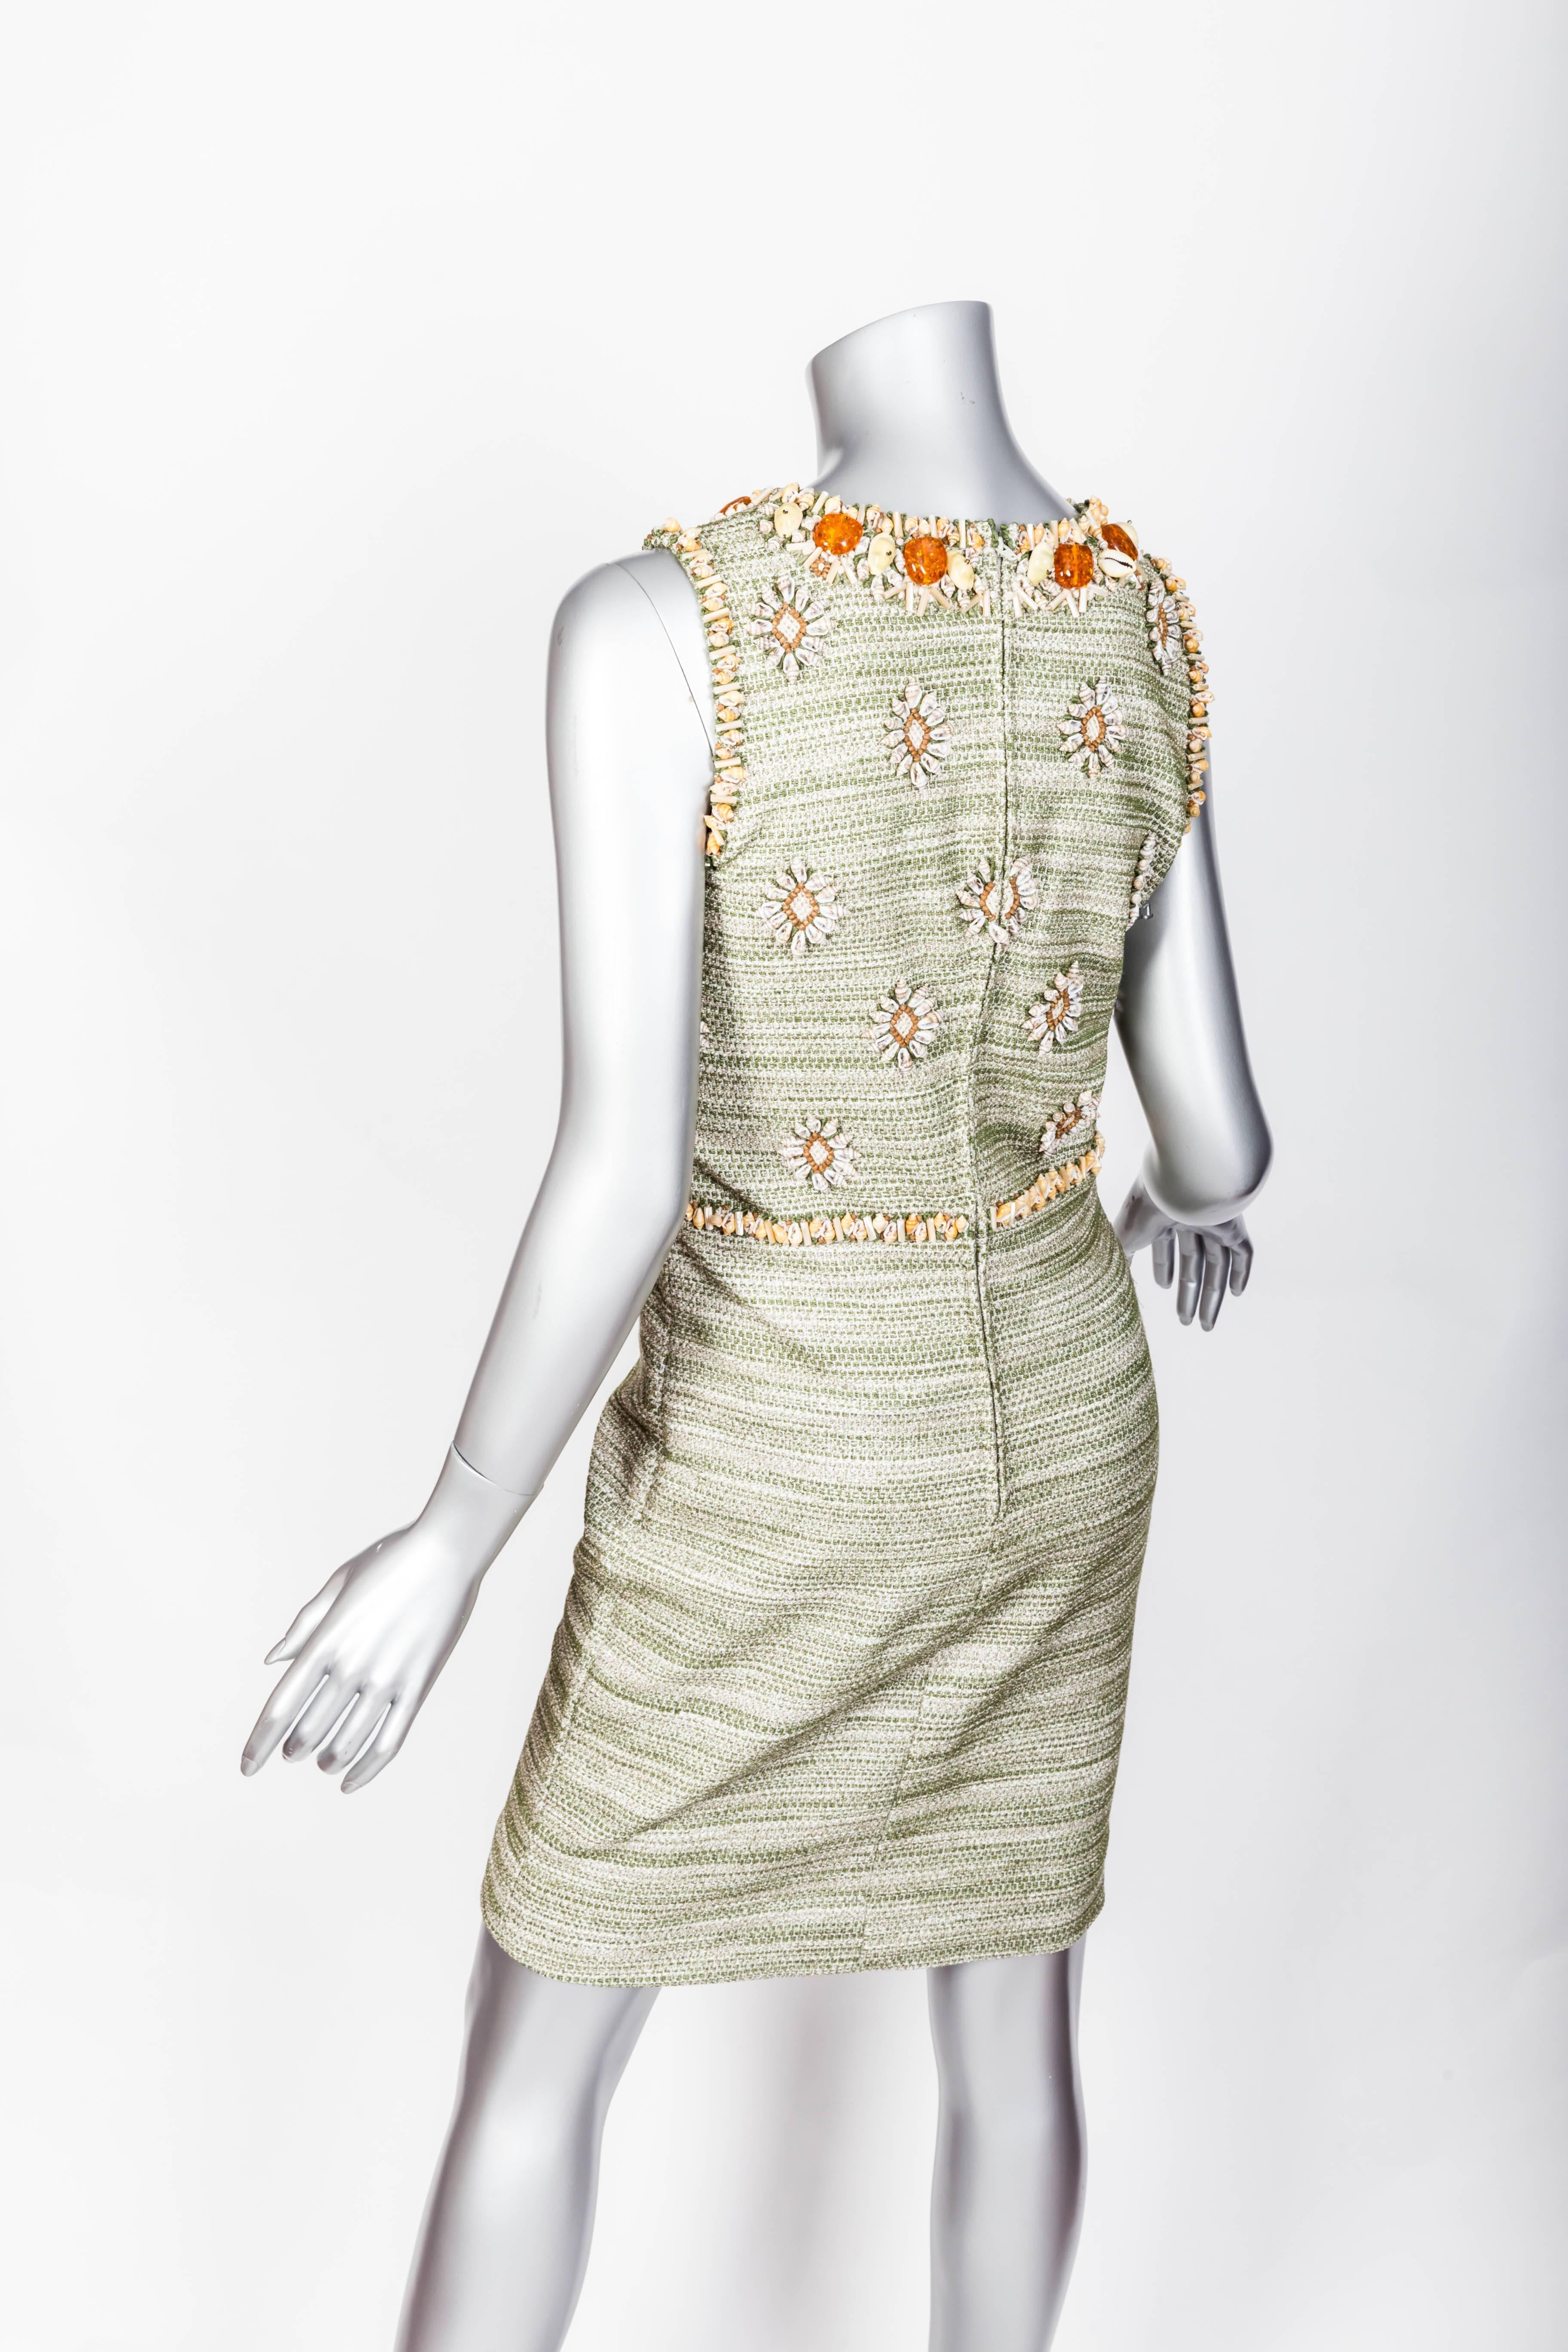 Stunning Oscar de la Renta shift dress in a woven green and white fabric embellished with seashells and some beading.
There is no size tag so please check measurements below.
This dress is in excellent condition and is a true work of art as